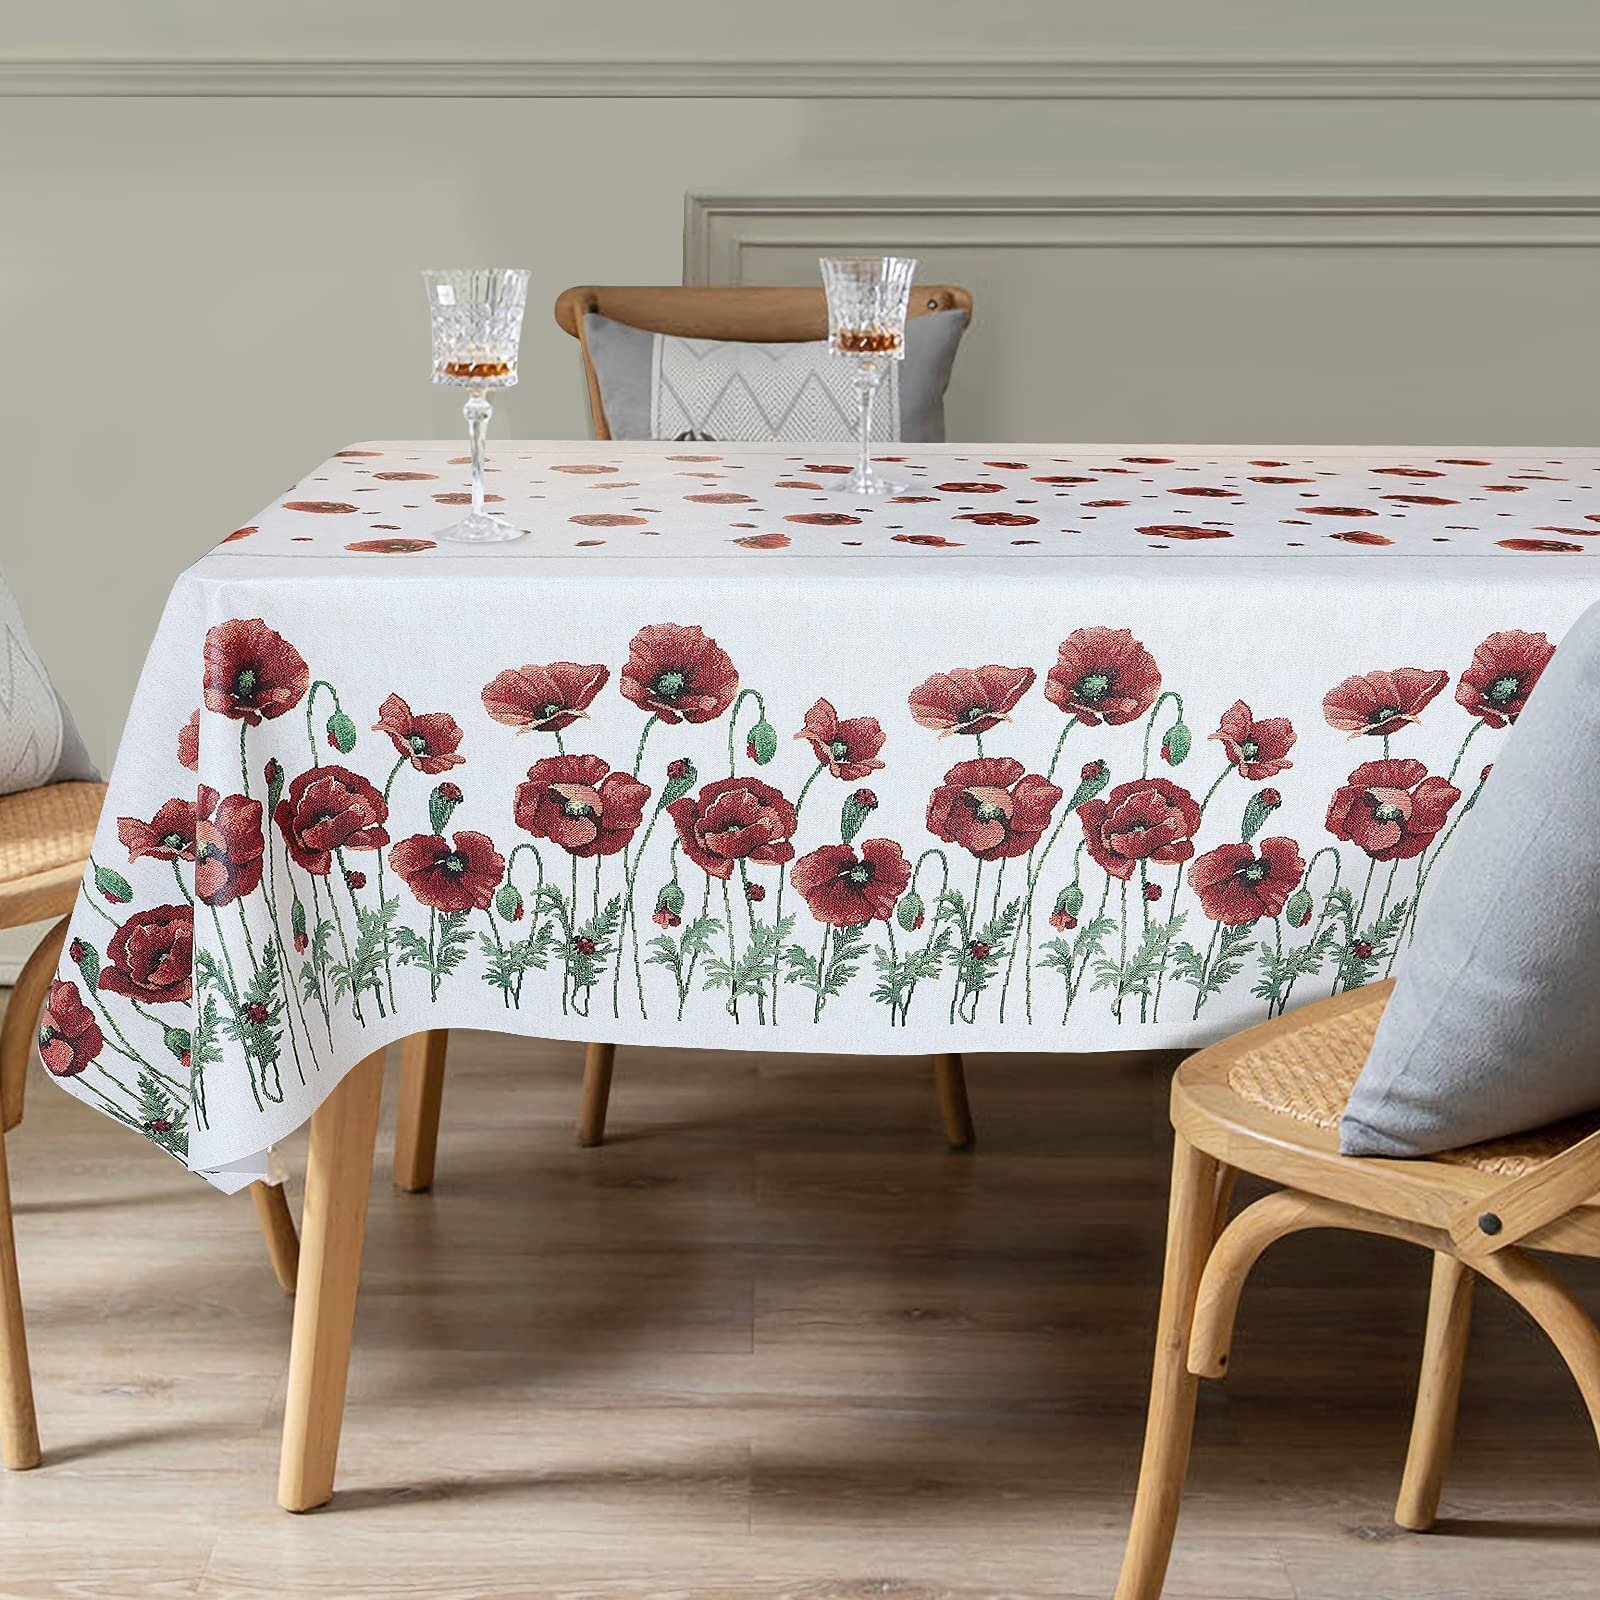 100% Polyester Table Cloth Rectangular Dustproof for Picnic,Flower 55inch 